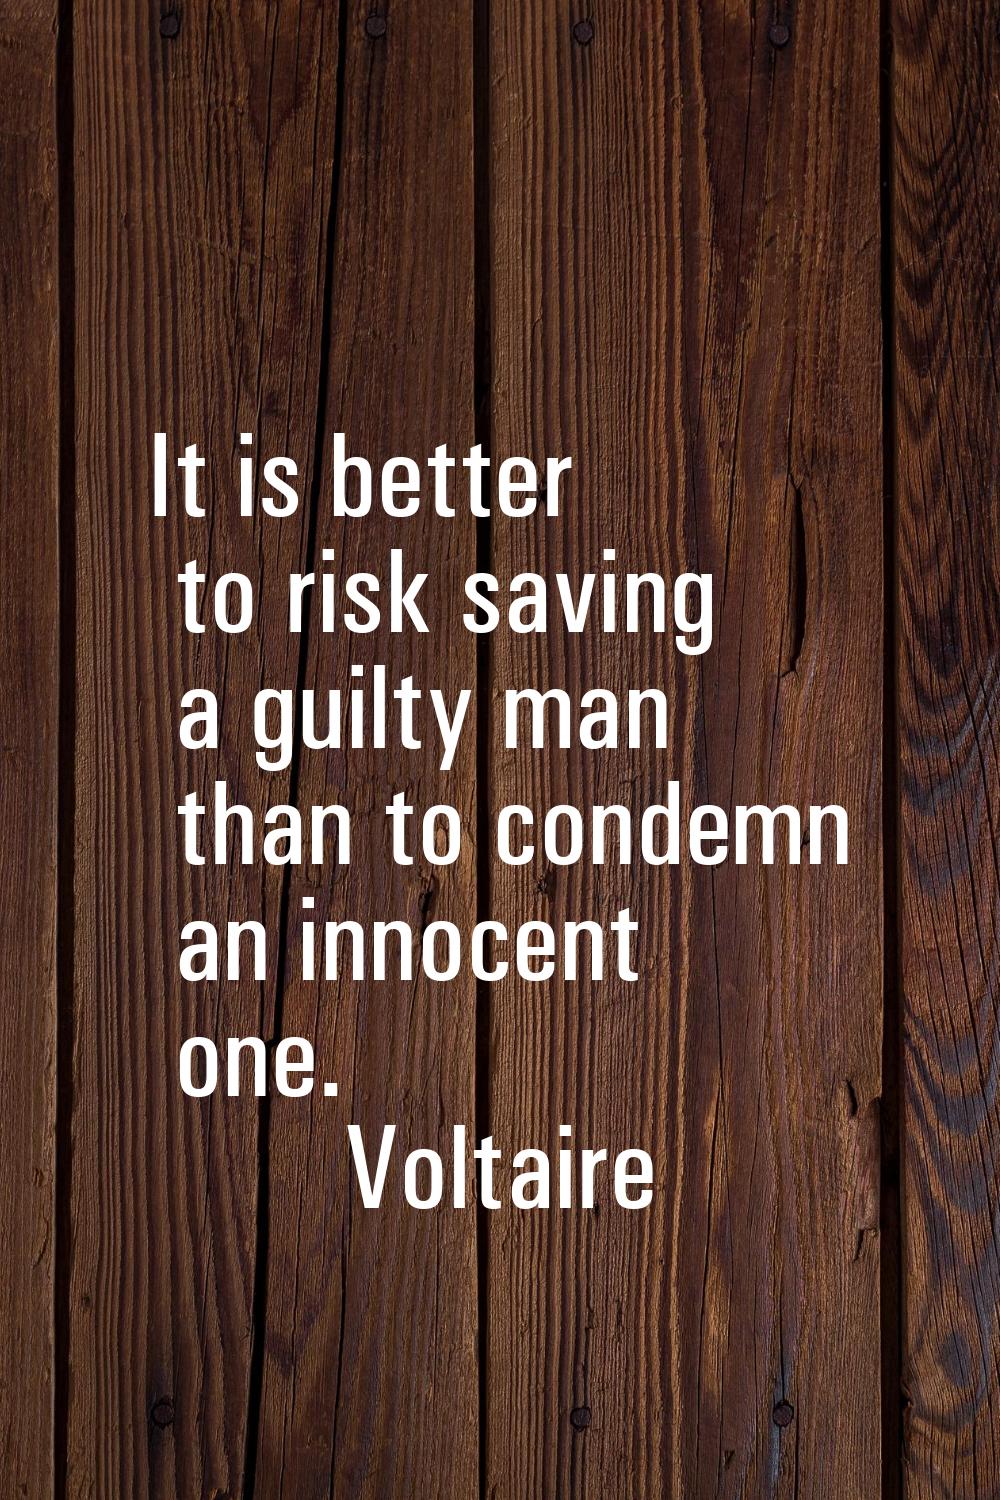 It is better to risk saving a guilty man than to condemn an innocent one.